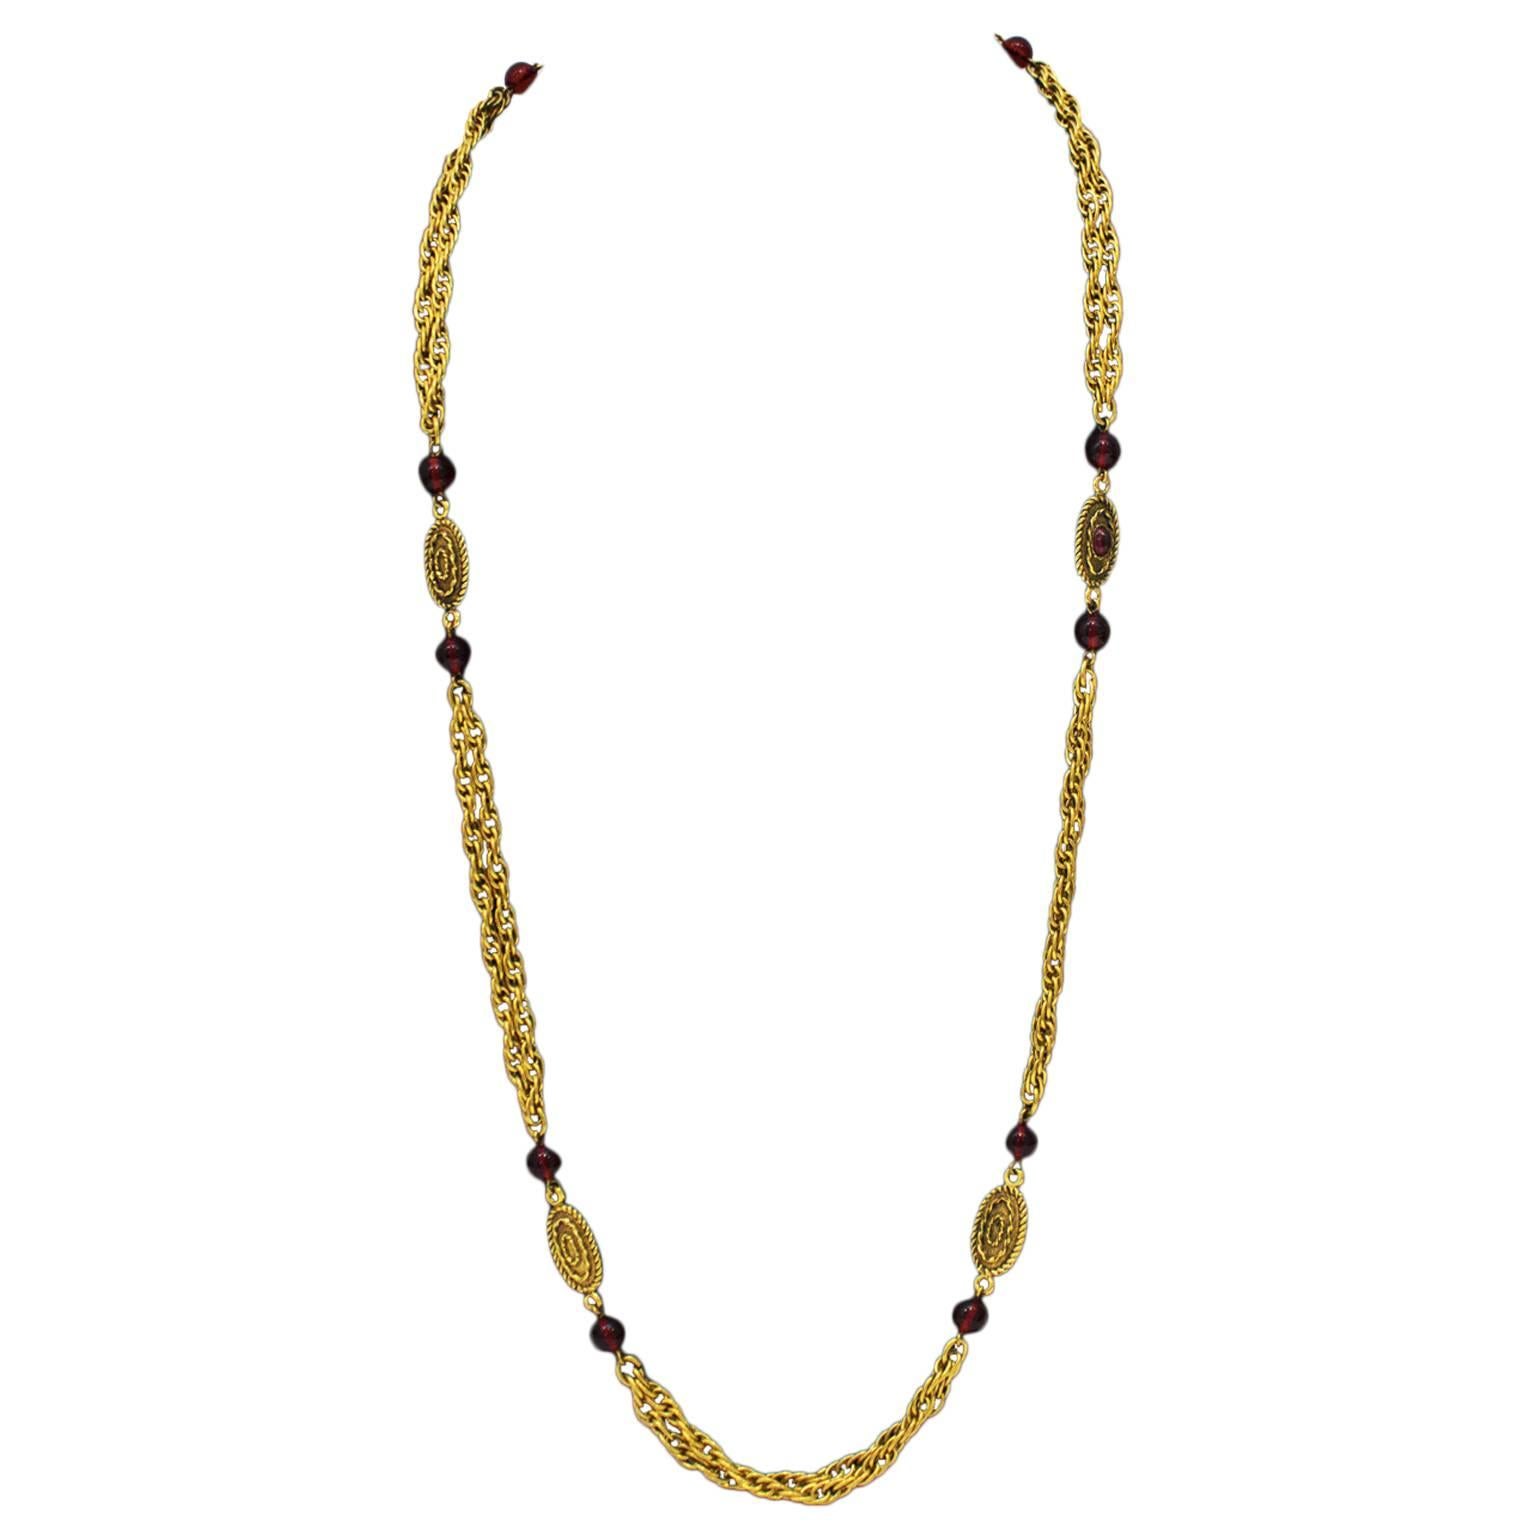 1982 Chanel Double Chain Necklace with Red Glass Beads